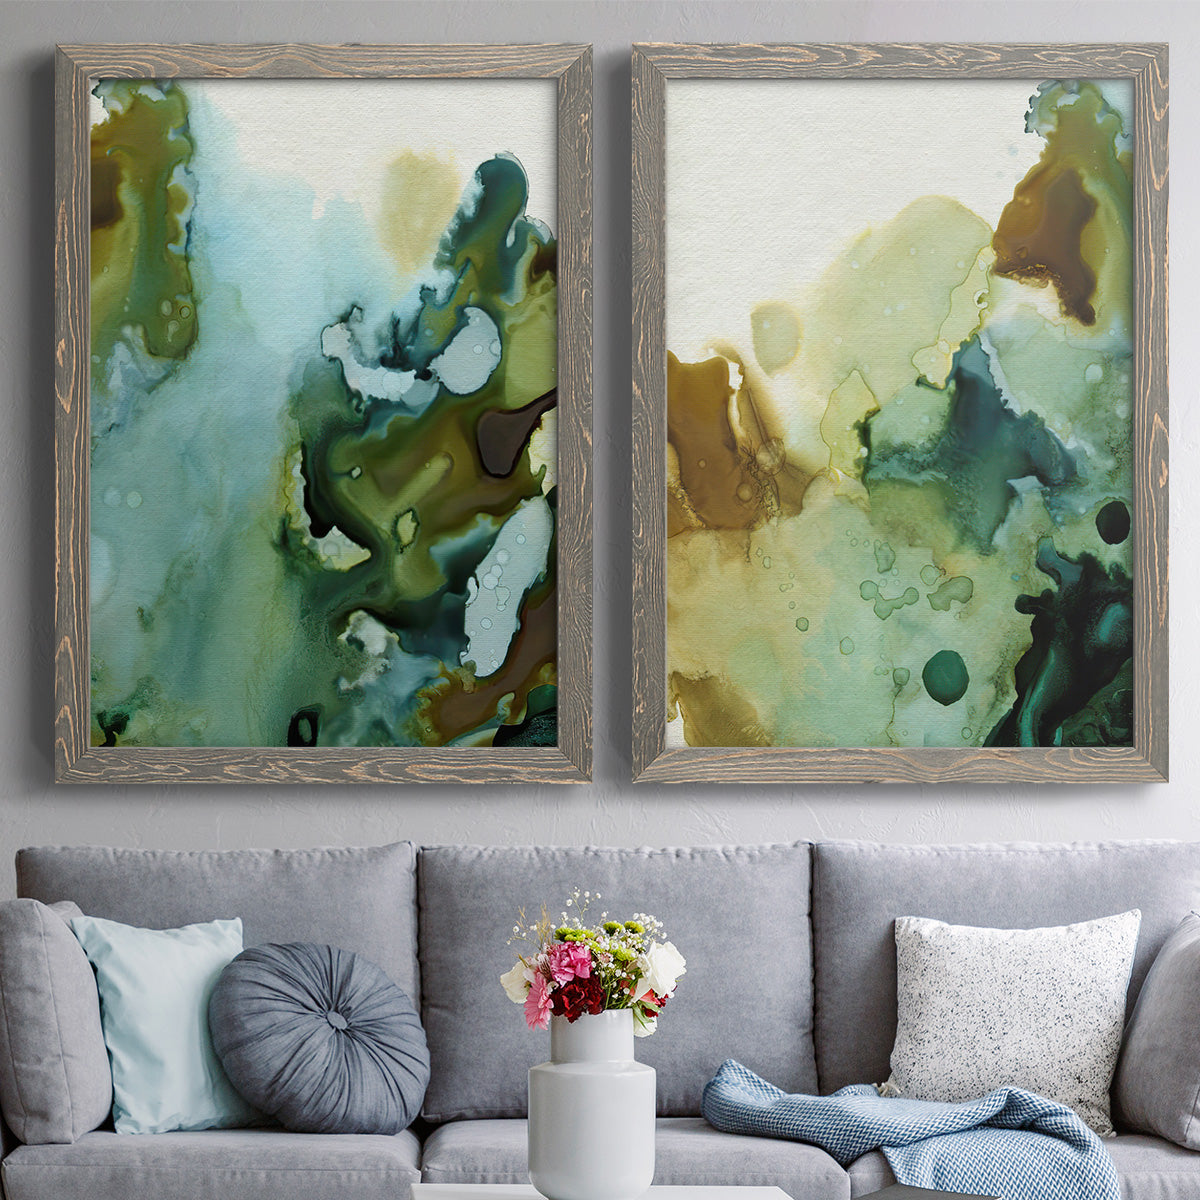 Water and Earth I - Premium Framed Canvas 2 Piece Set - Ready to Hang